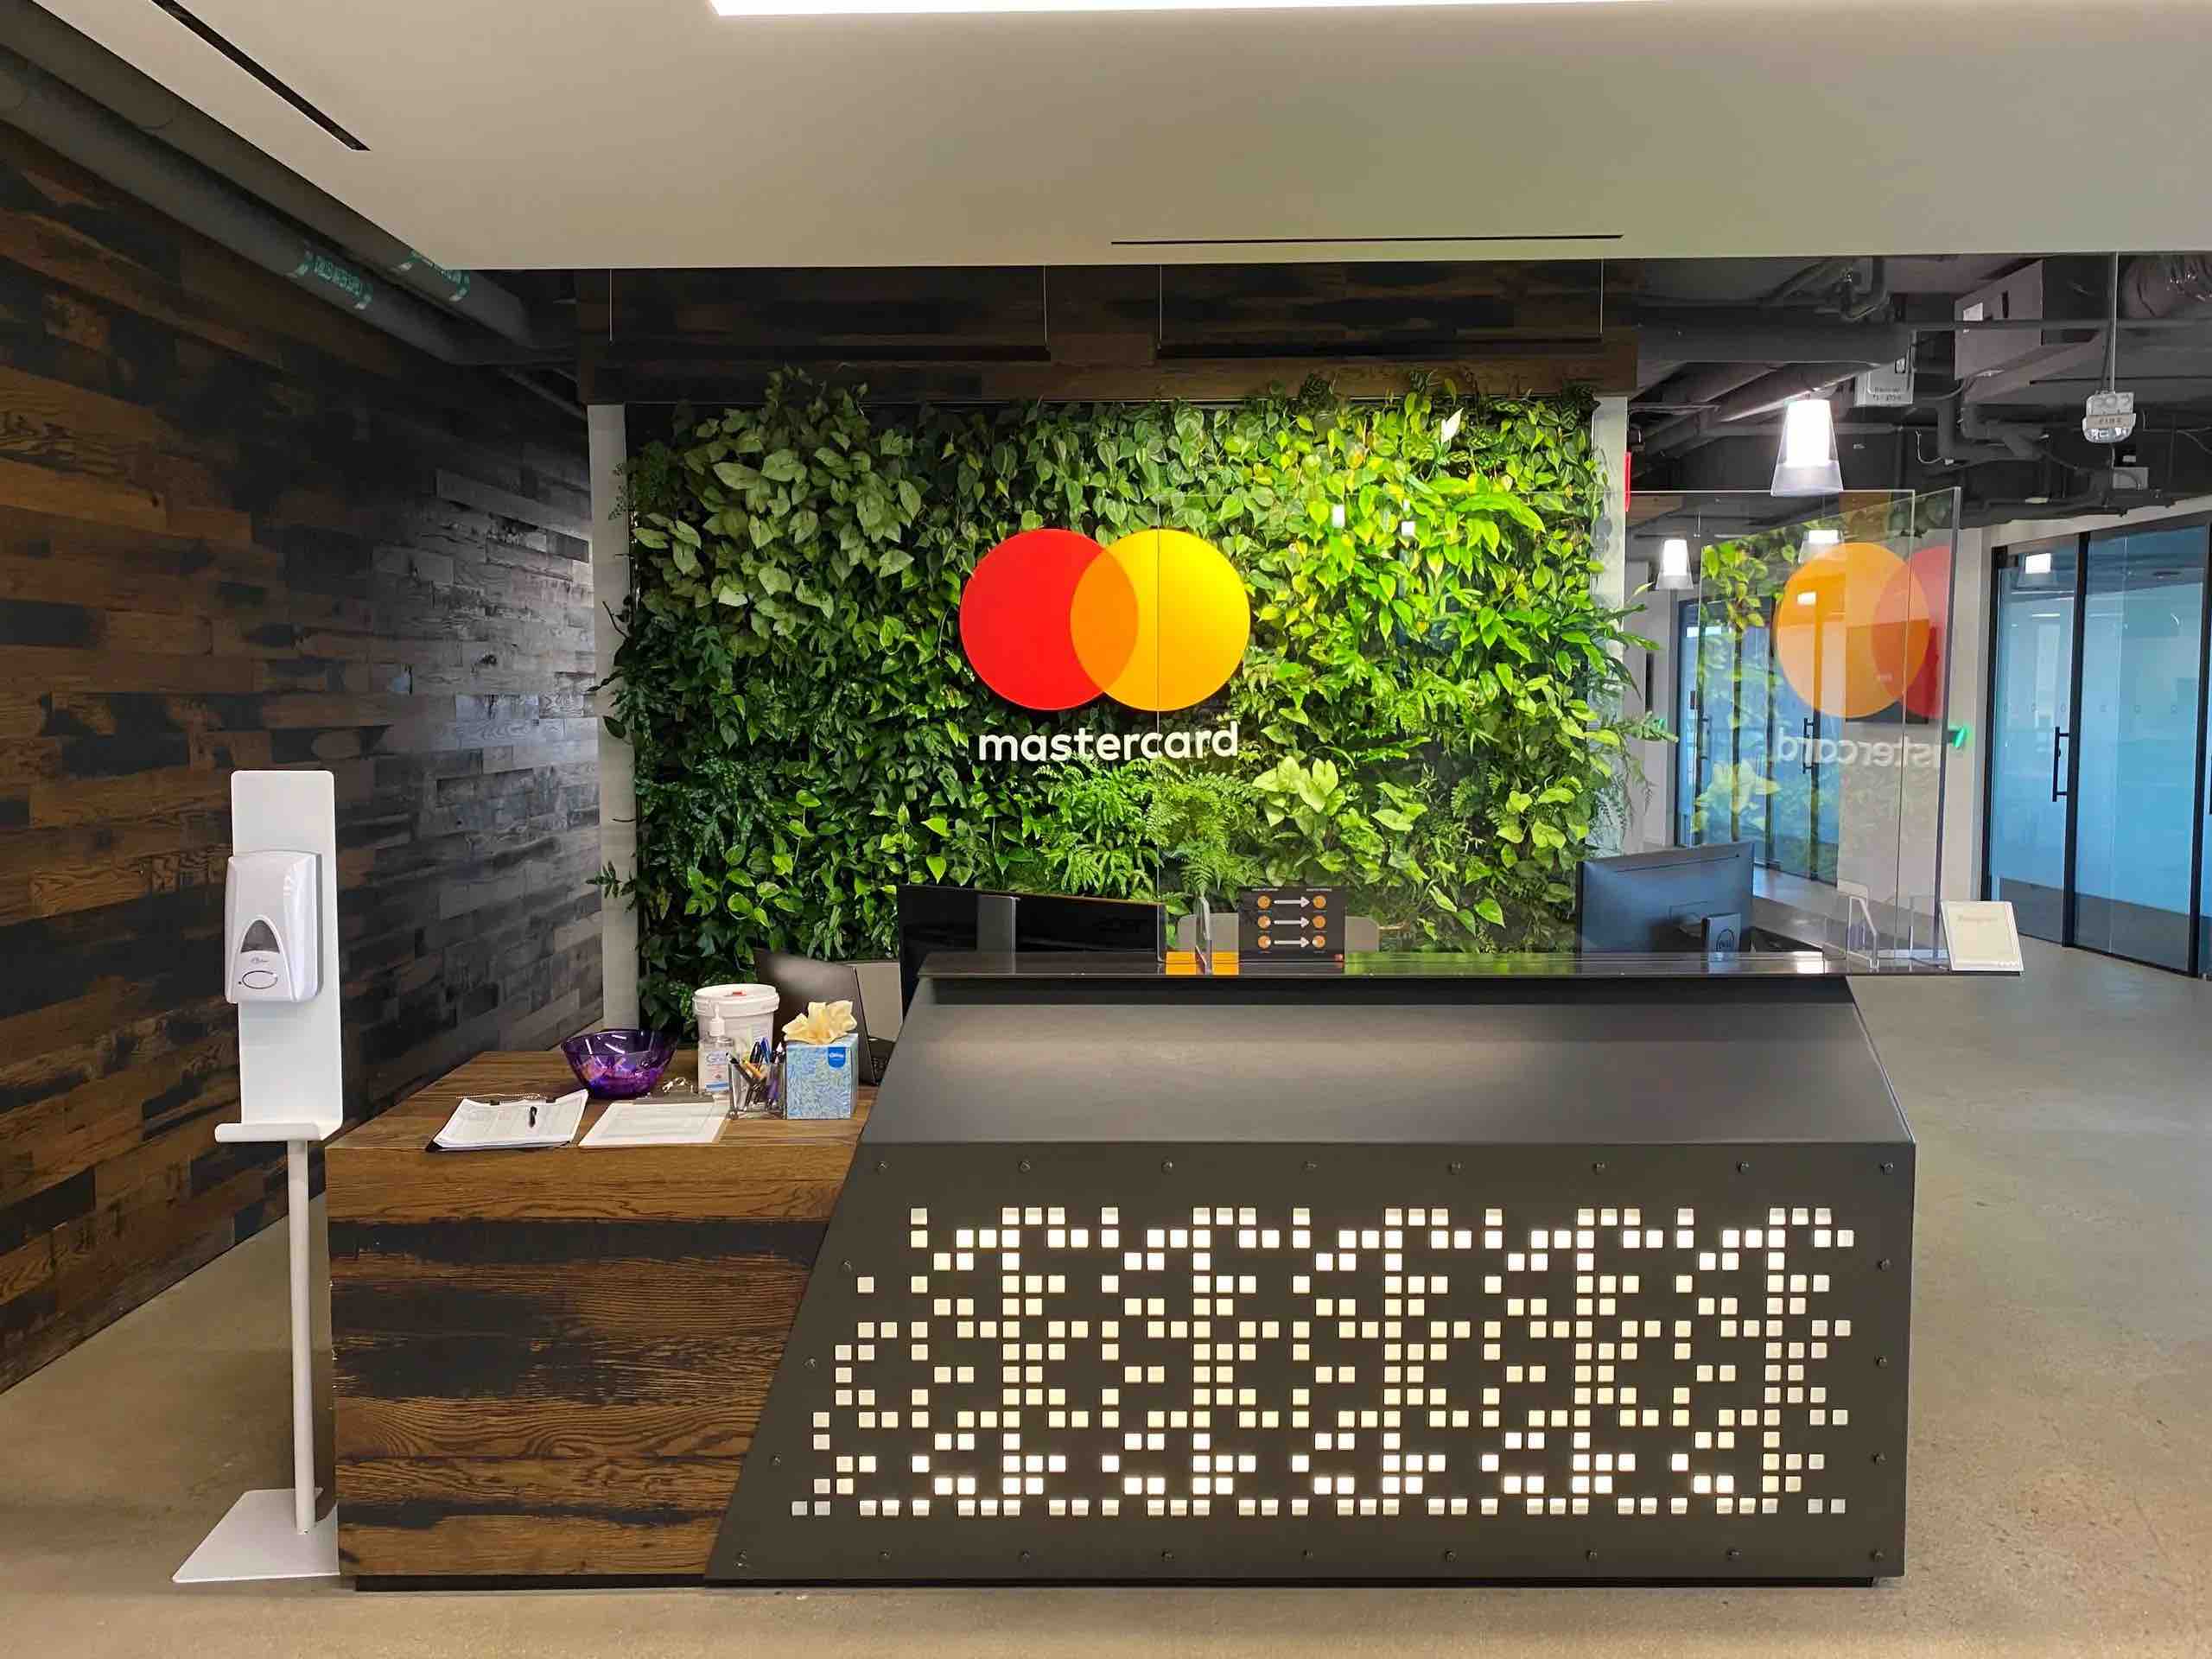 Mastercard Overhauls Organisational Structure for Innovation Drive